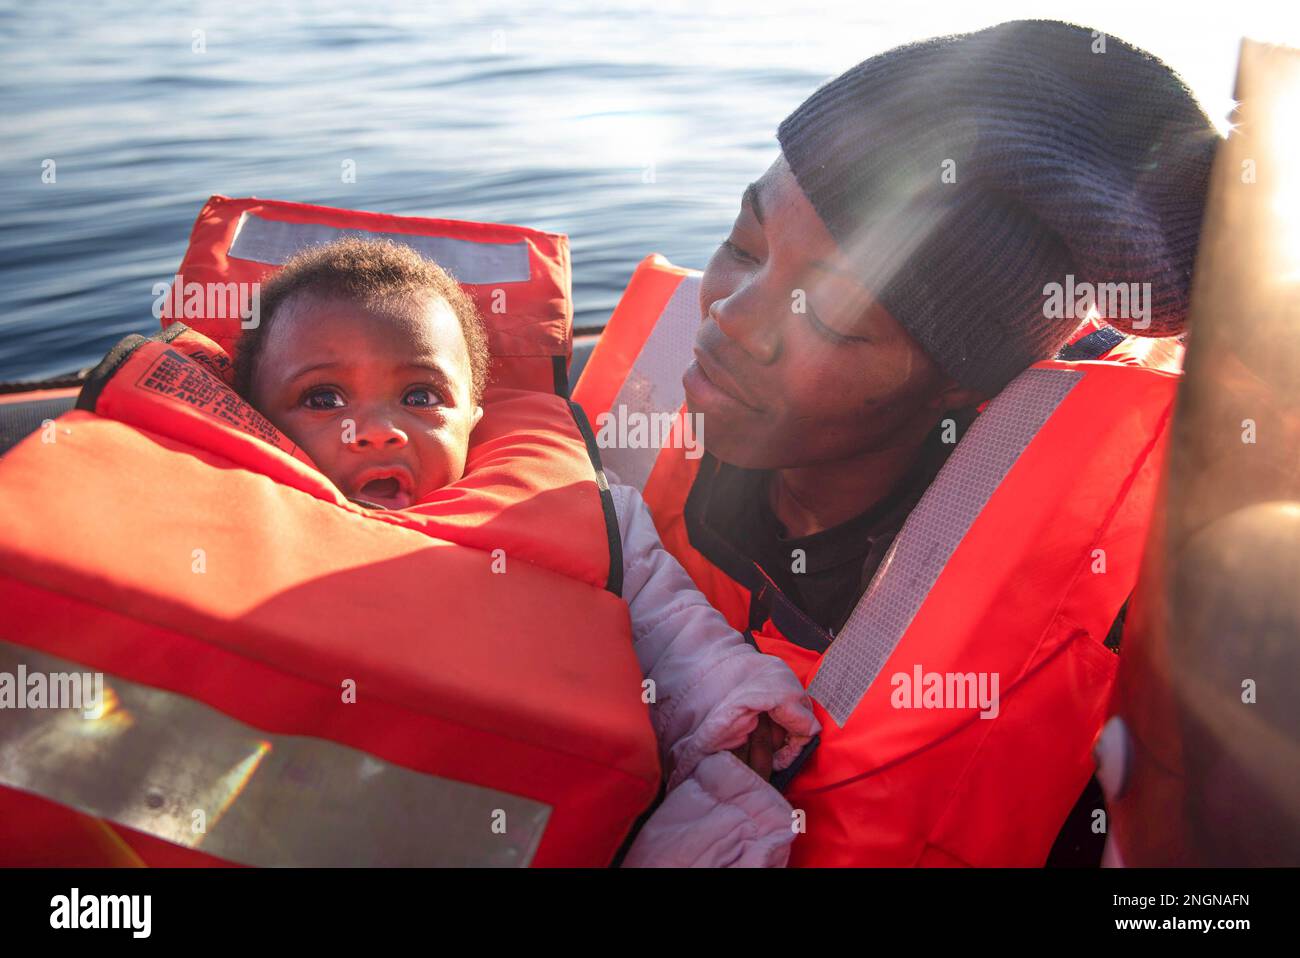 A mother and her 3-month-old baby minutes seen after being taken to safety  in an SMH rescue boat in SAR Malta. On Wednesday 15 February at around  15:00 hrs the rescue vessel